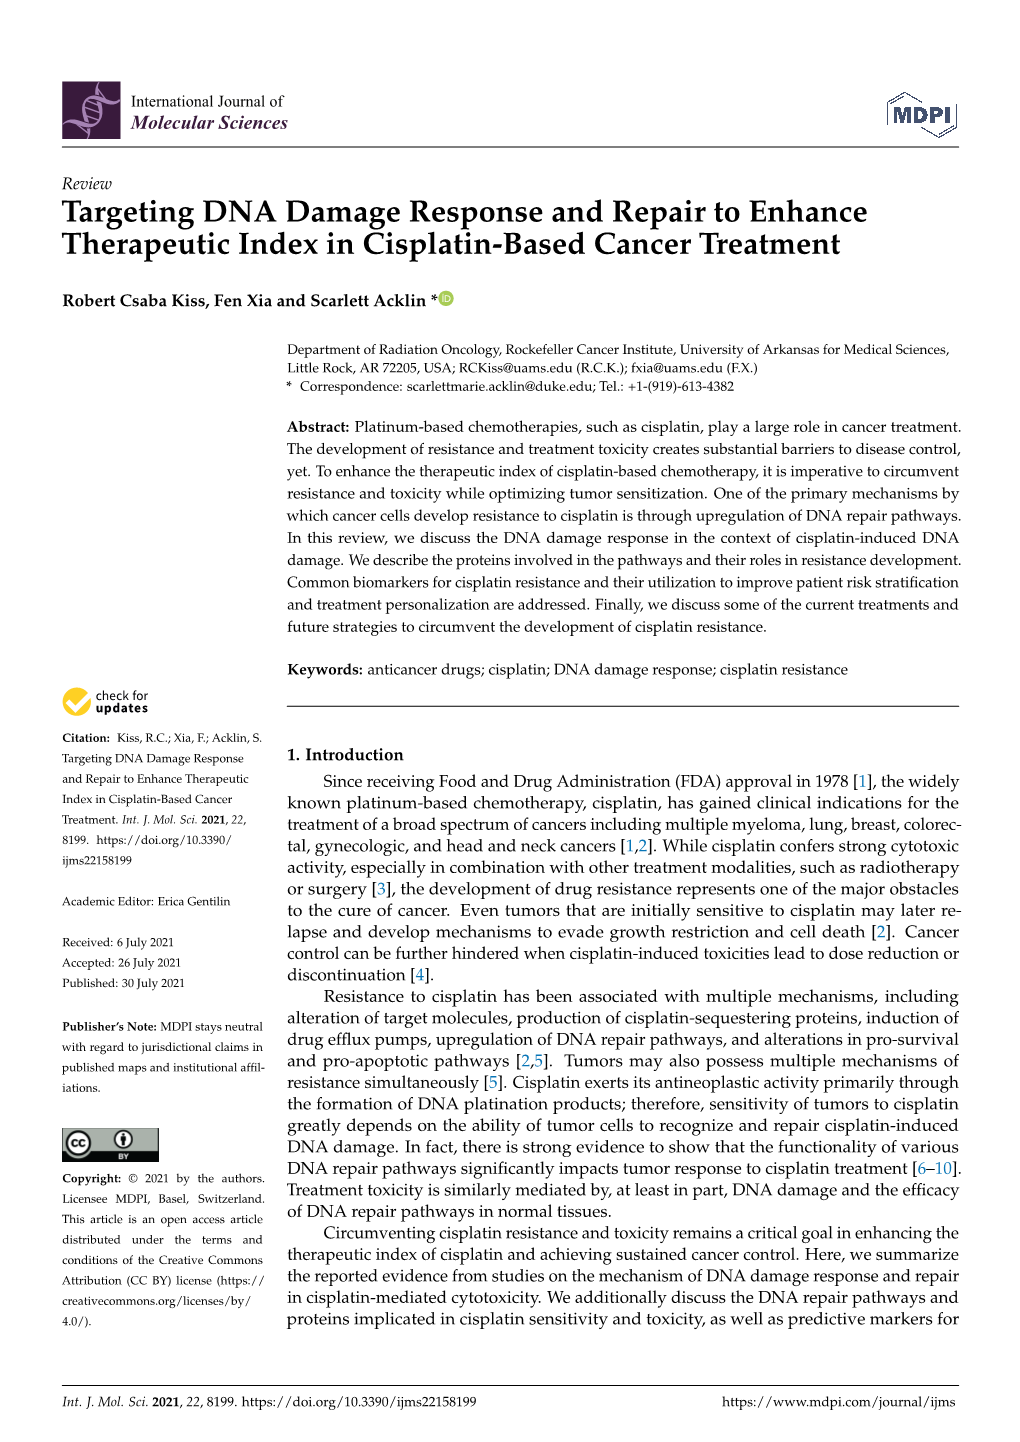 Targeting DNA Damage Response and Repair to Enhance Therapeutic Index in Cisplatin-Based Cancer Treatment